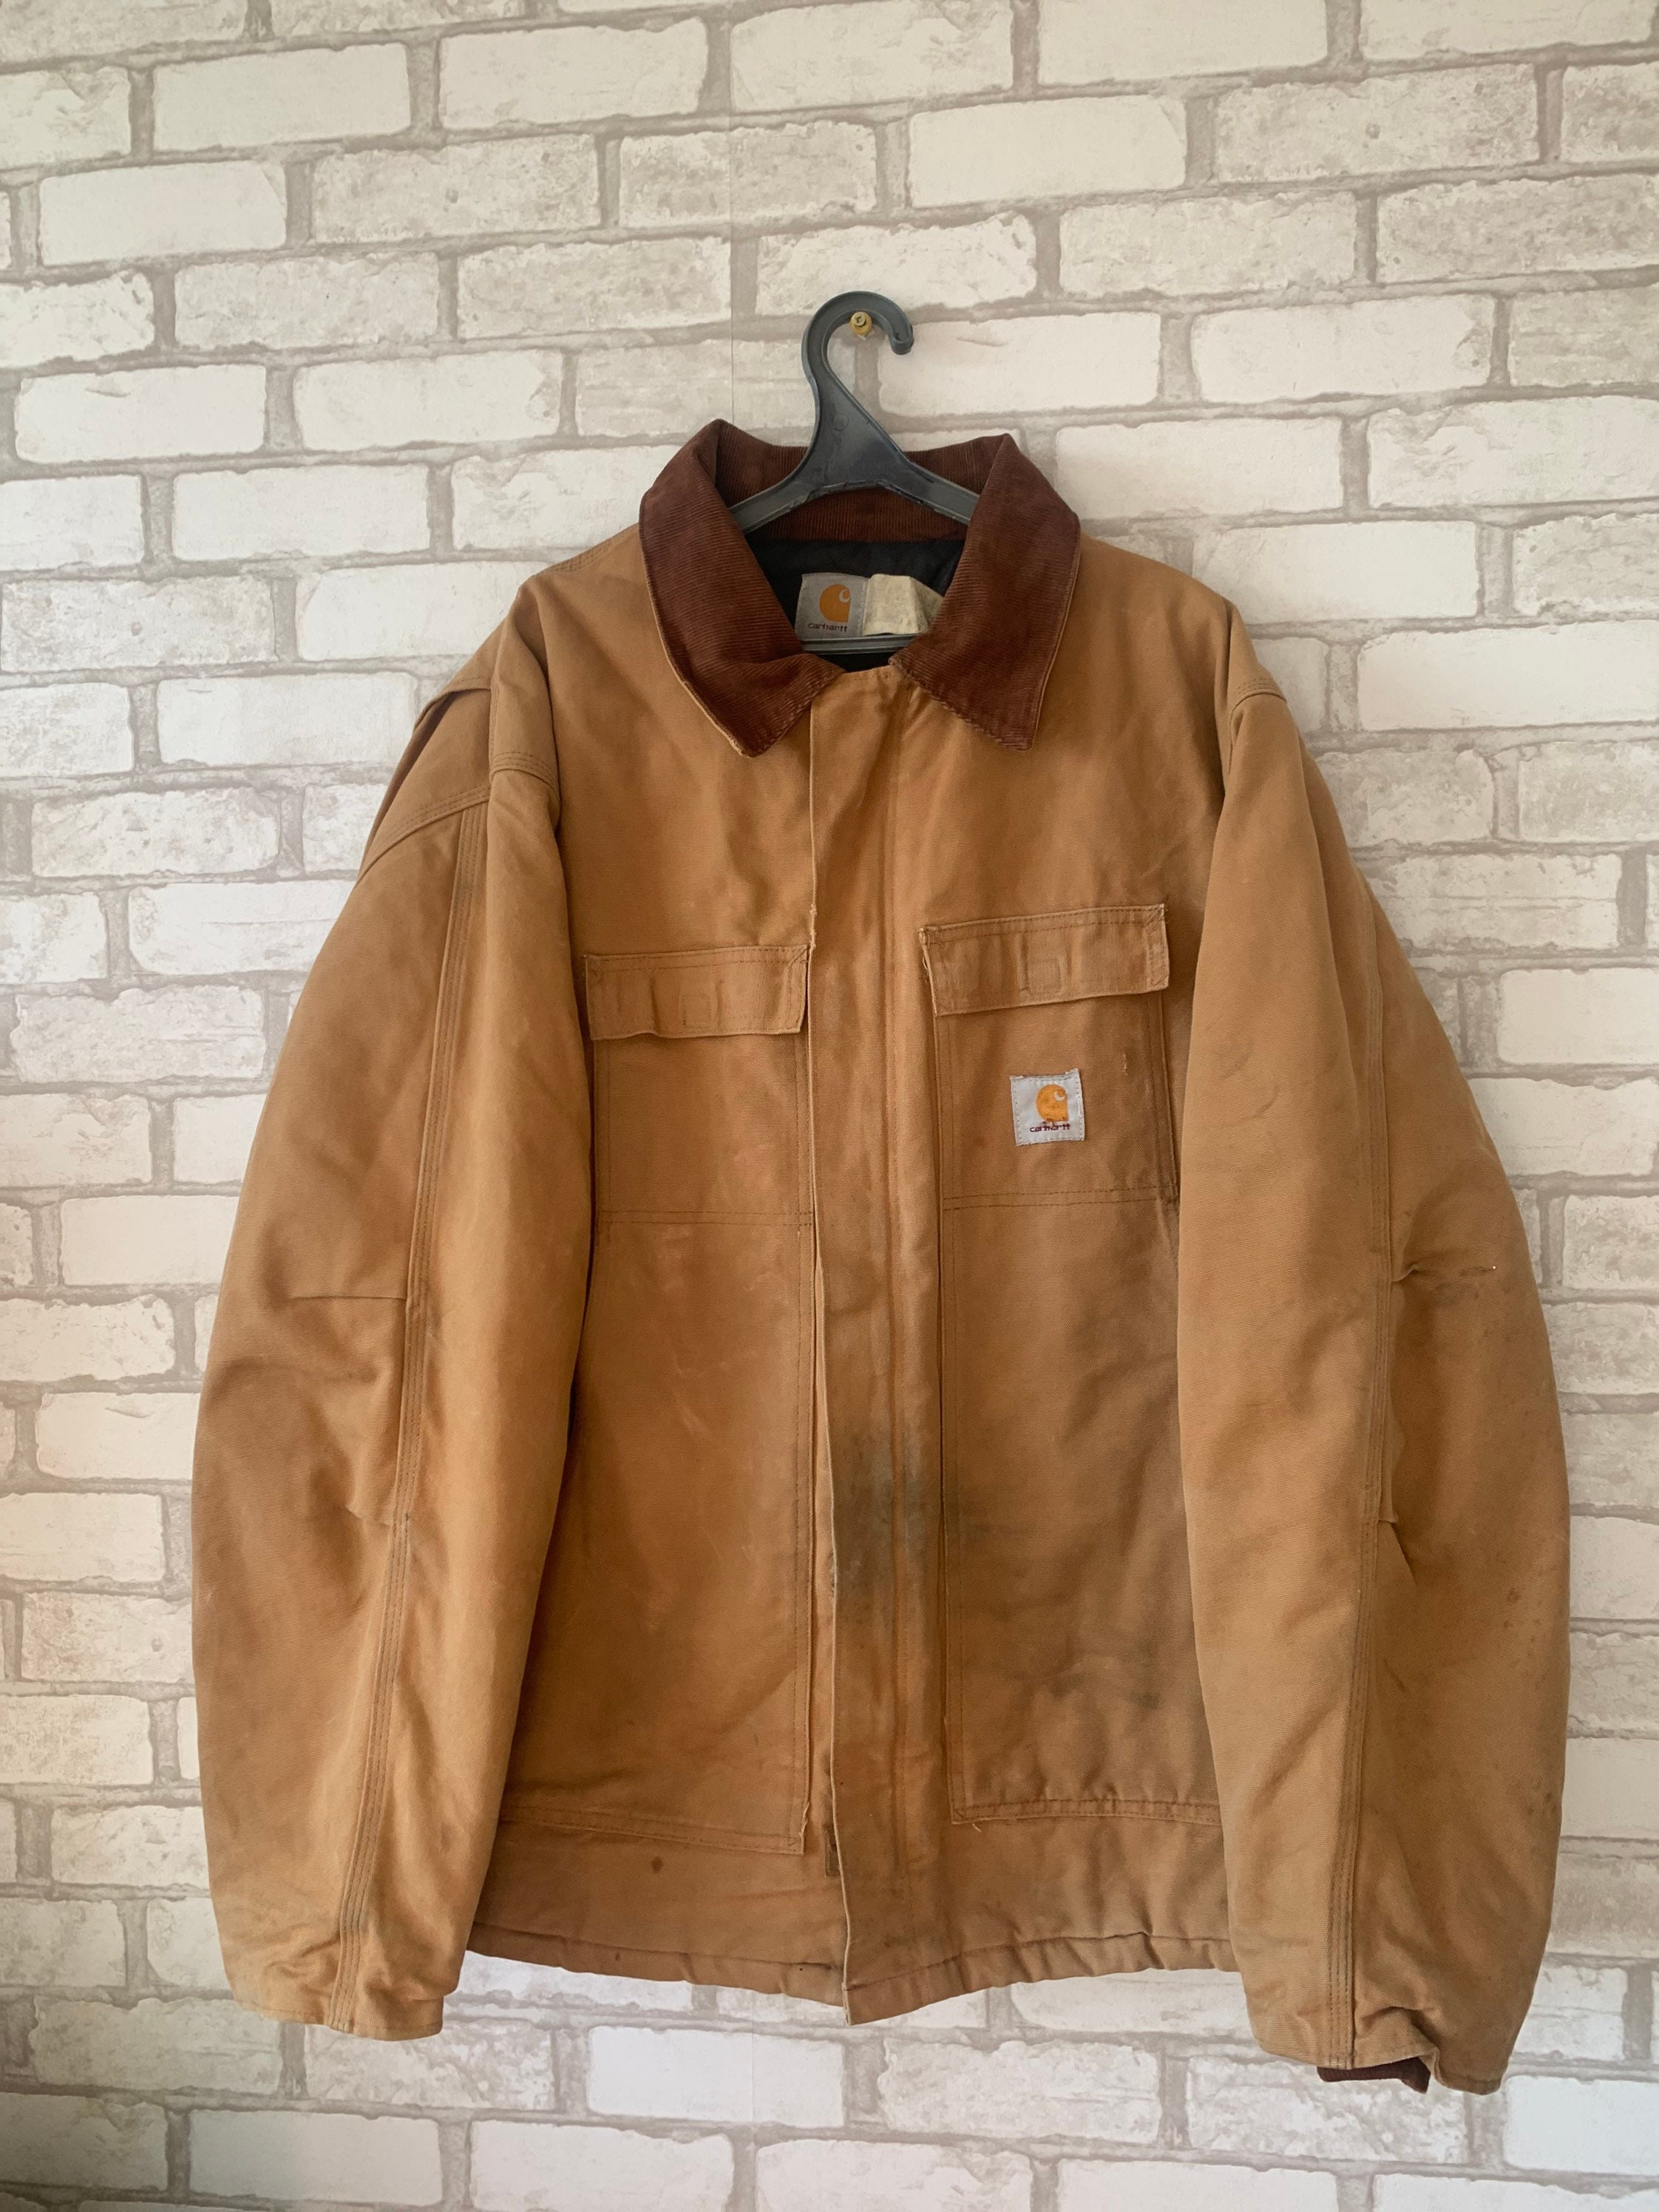 Carhartt Vintage Arctic Work Jacket Chore Made in USA 1990s - Etsy